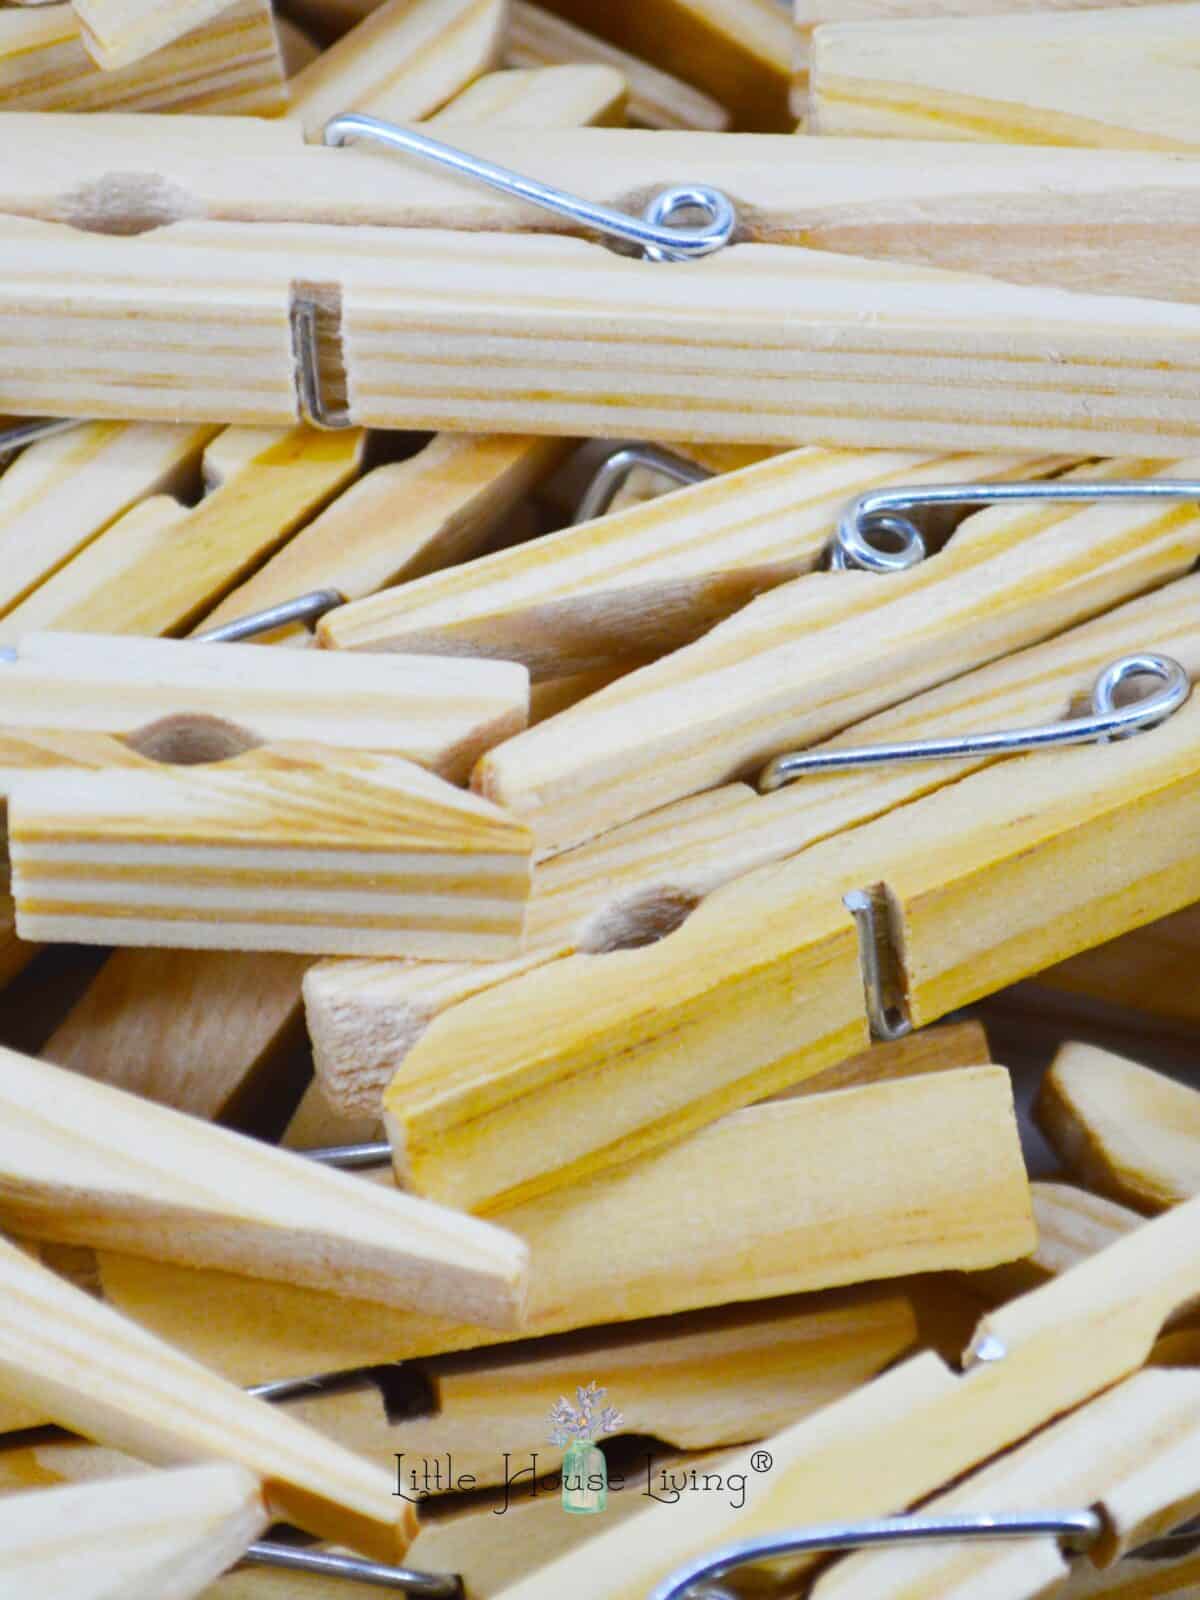 Wooden clothespins in a pile.